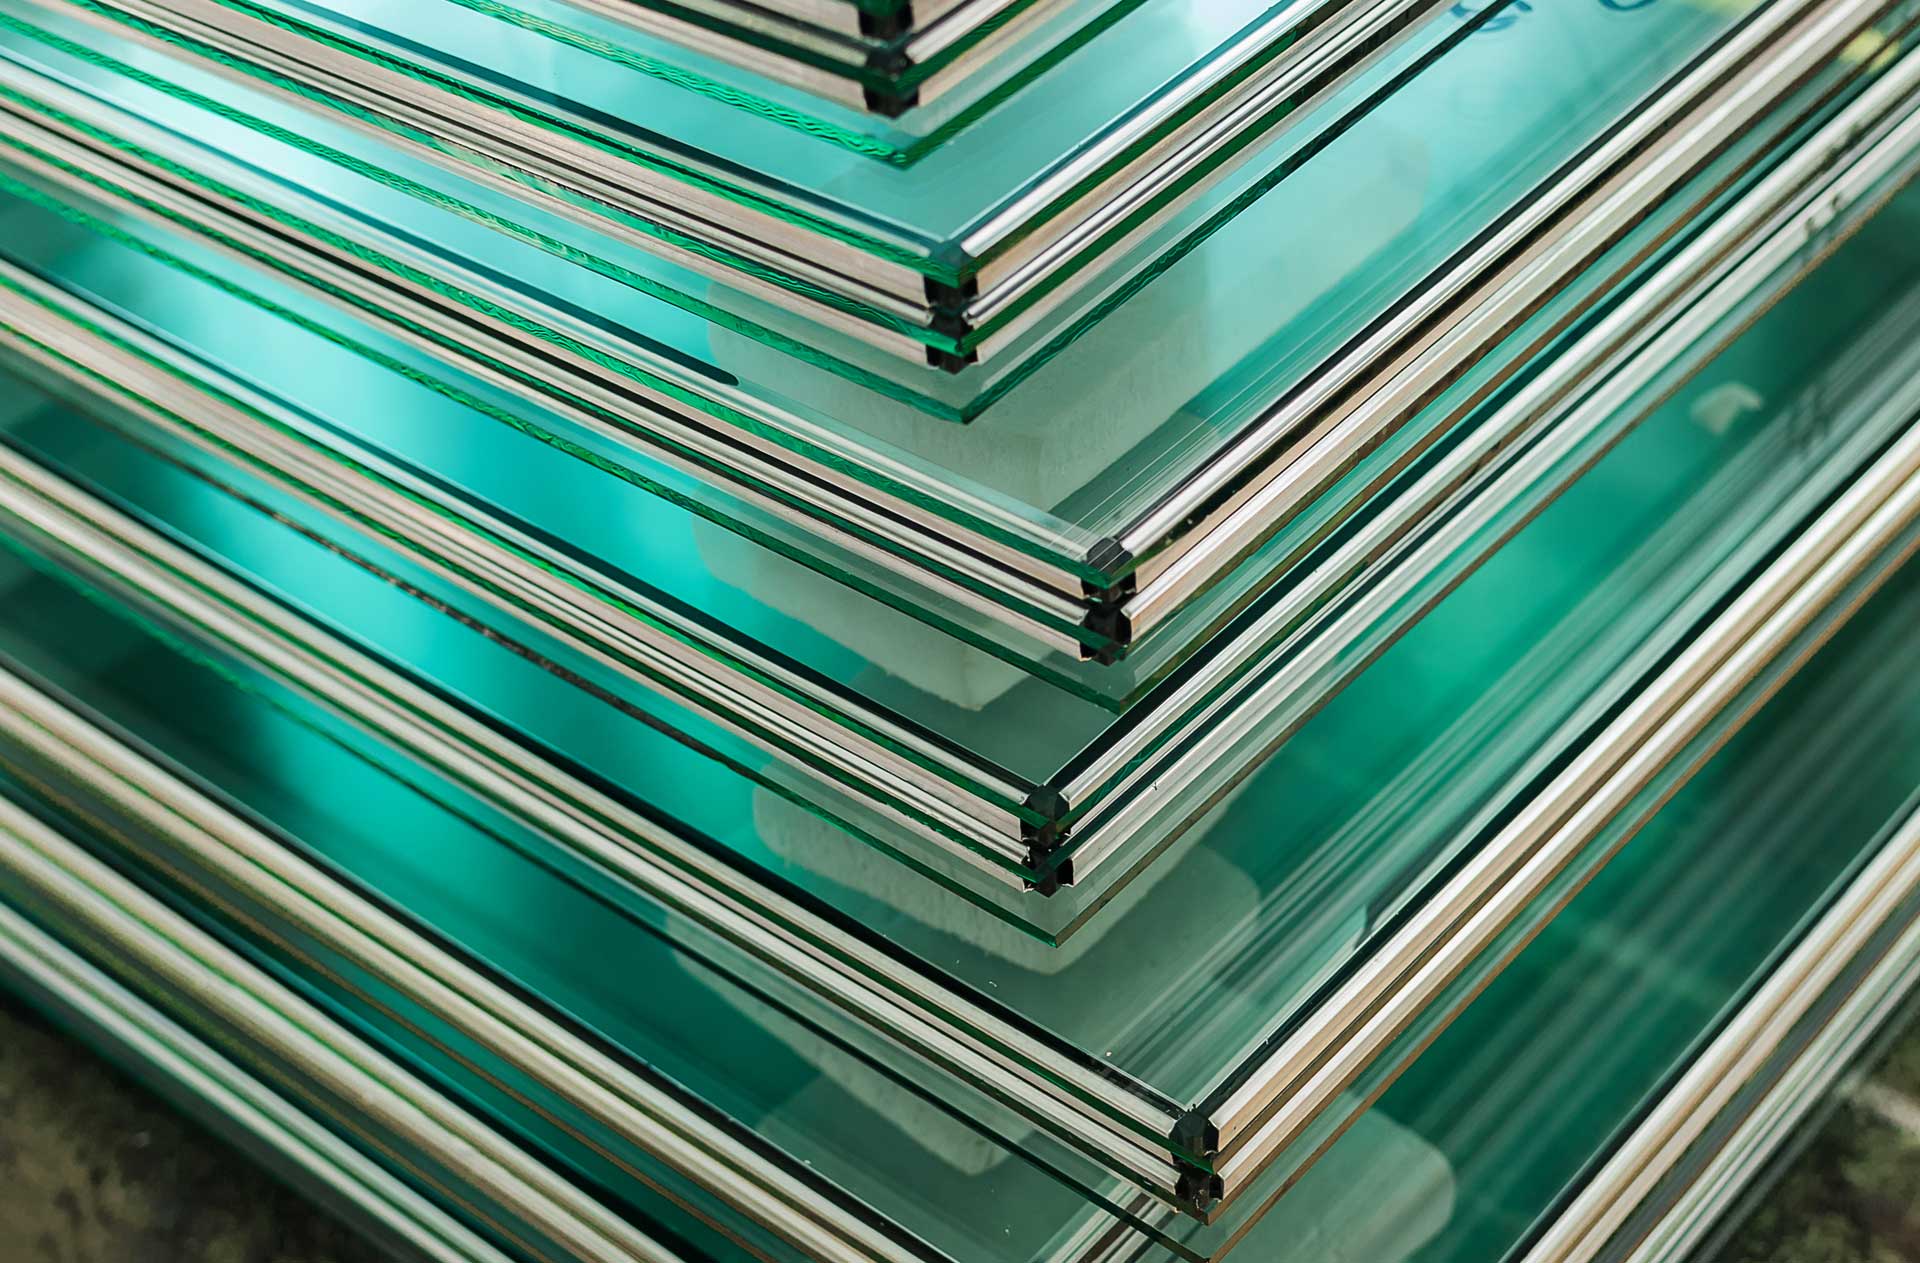 Stack of glass panes manufactured with dust collection solutions